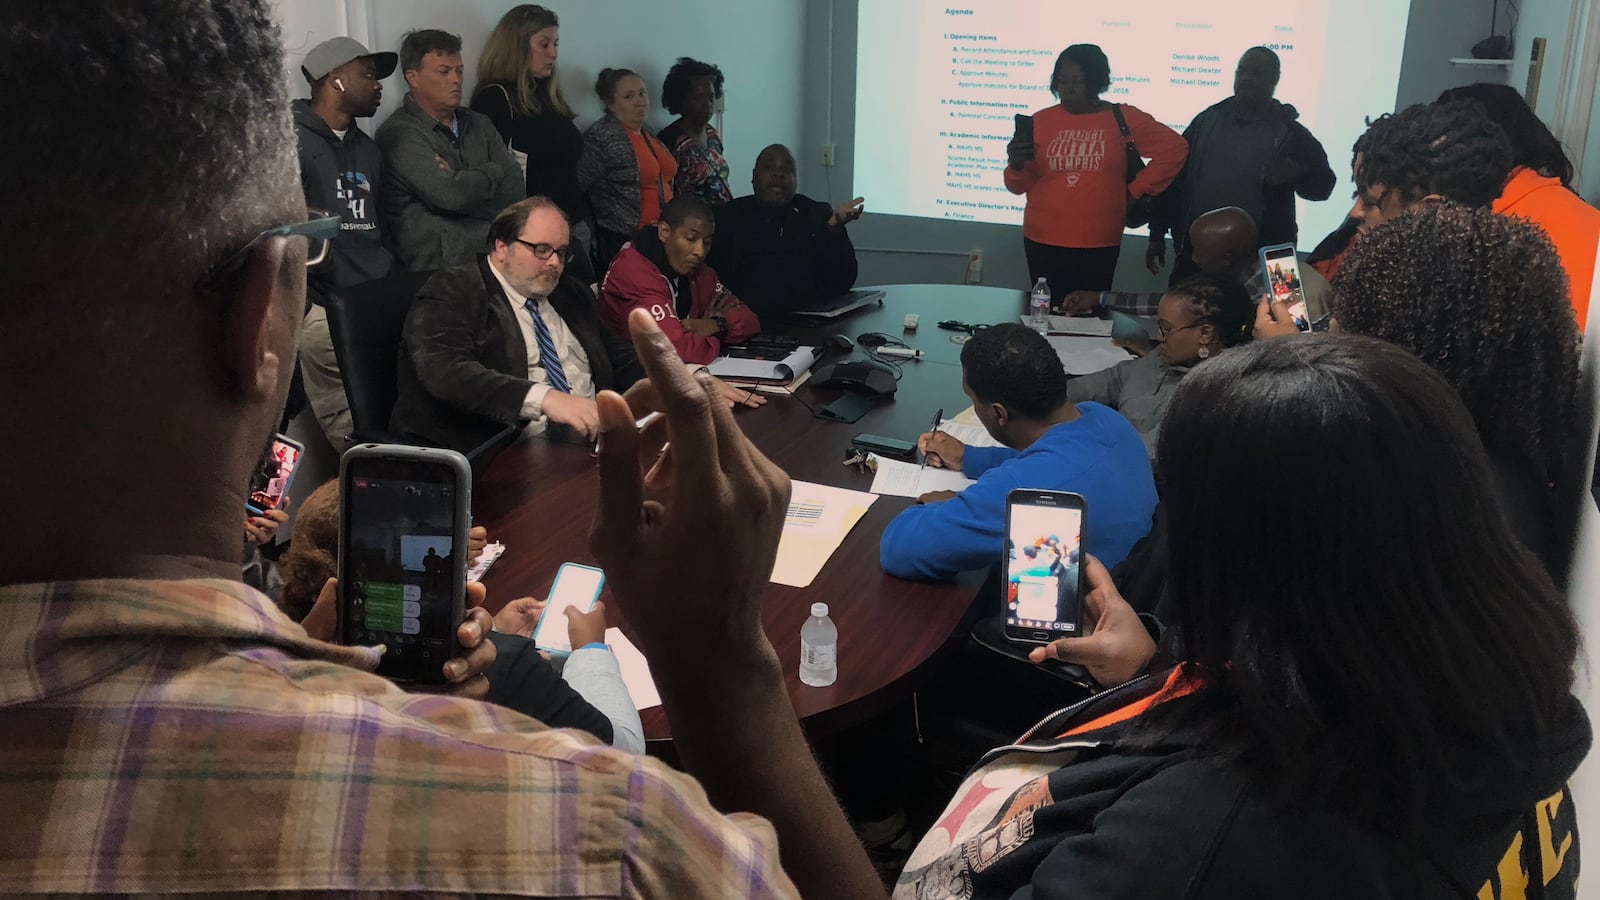 About 20 parents and parent supporters crowded a conference room at Memphis Academy of Health Sciences to demand answers about the high school principal's abrupt departure.